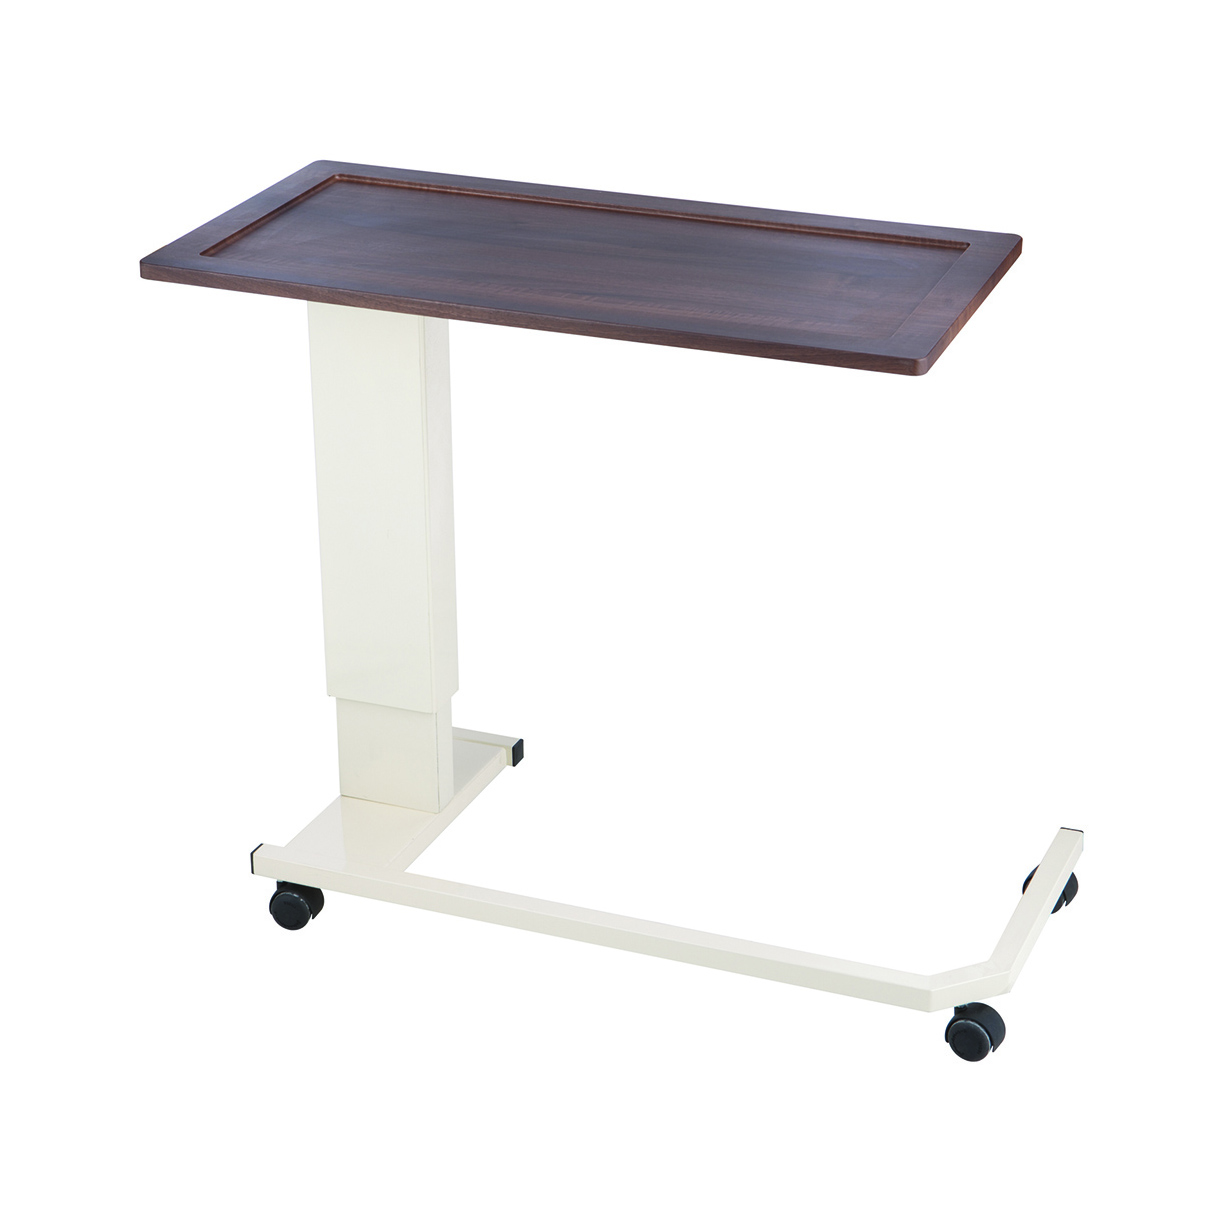 Rise & Fall Overbed Table For Low Profile Beds And Wheel Chairs